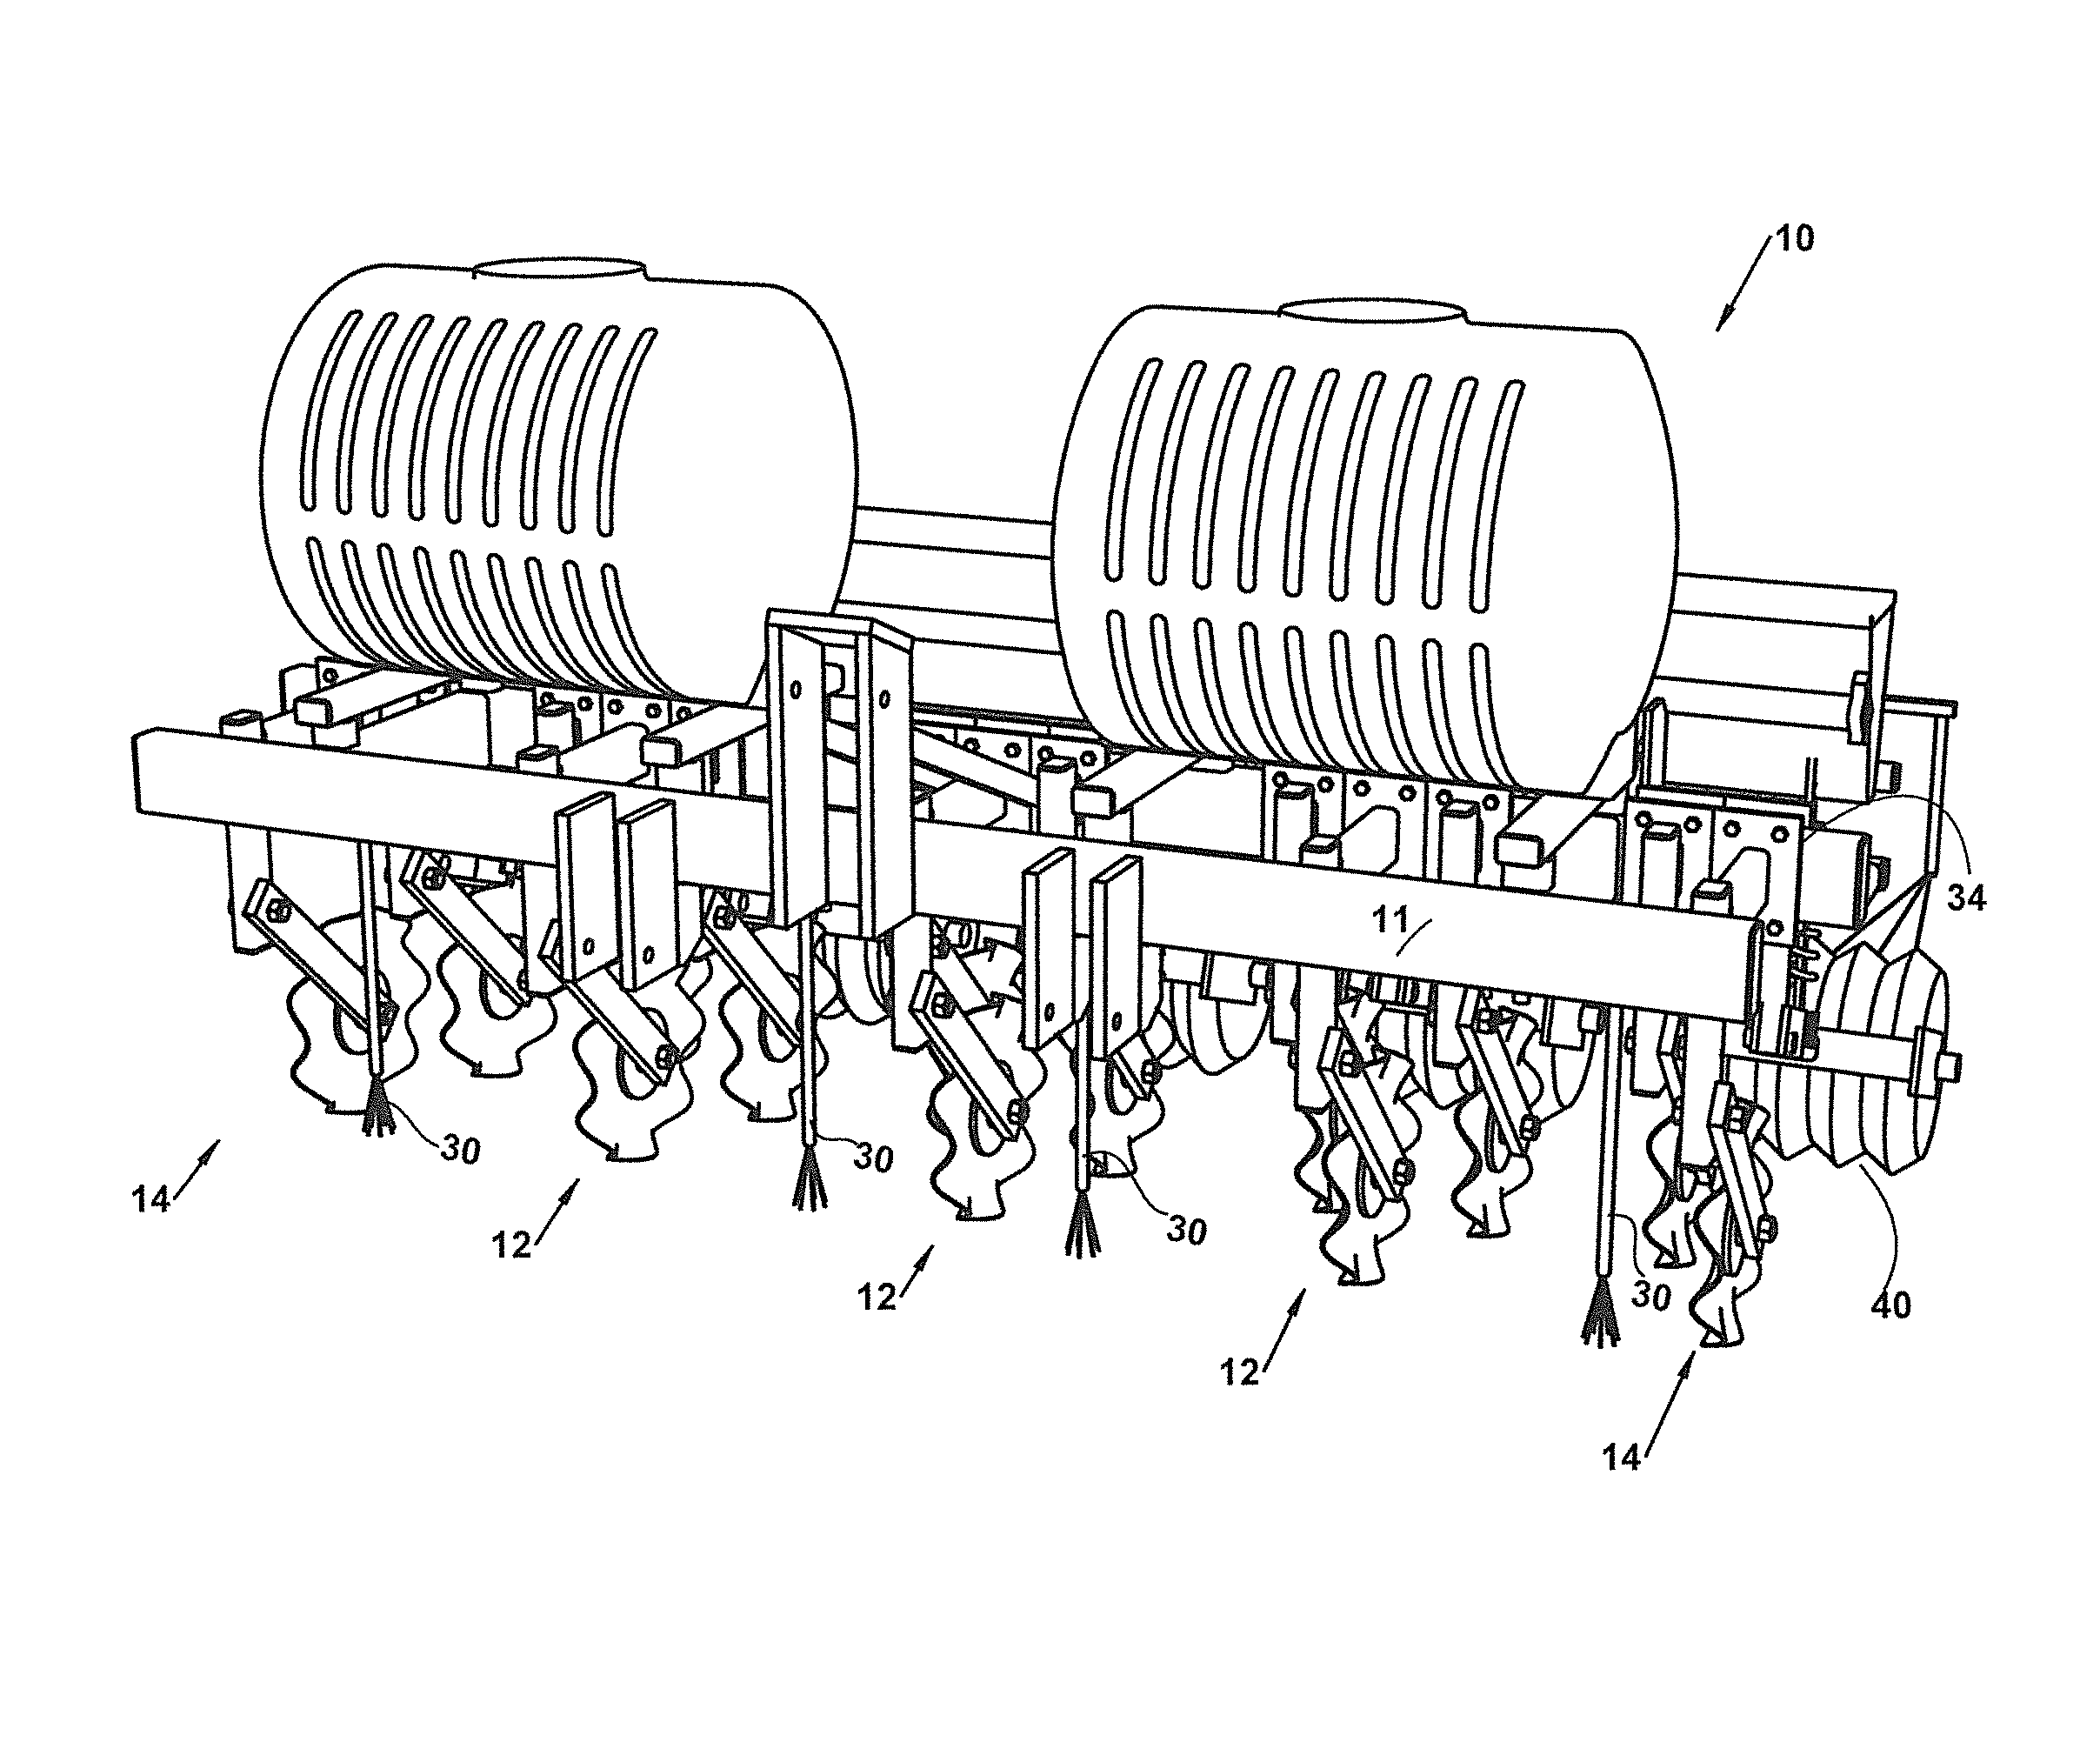 Apparatus and method for no-till inter-row simultaneous application of herbicide and fertilizer, soil preparation, and seeding of a cover crop in a standing crop